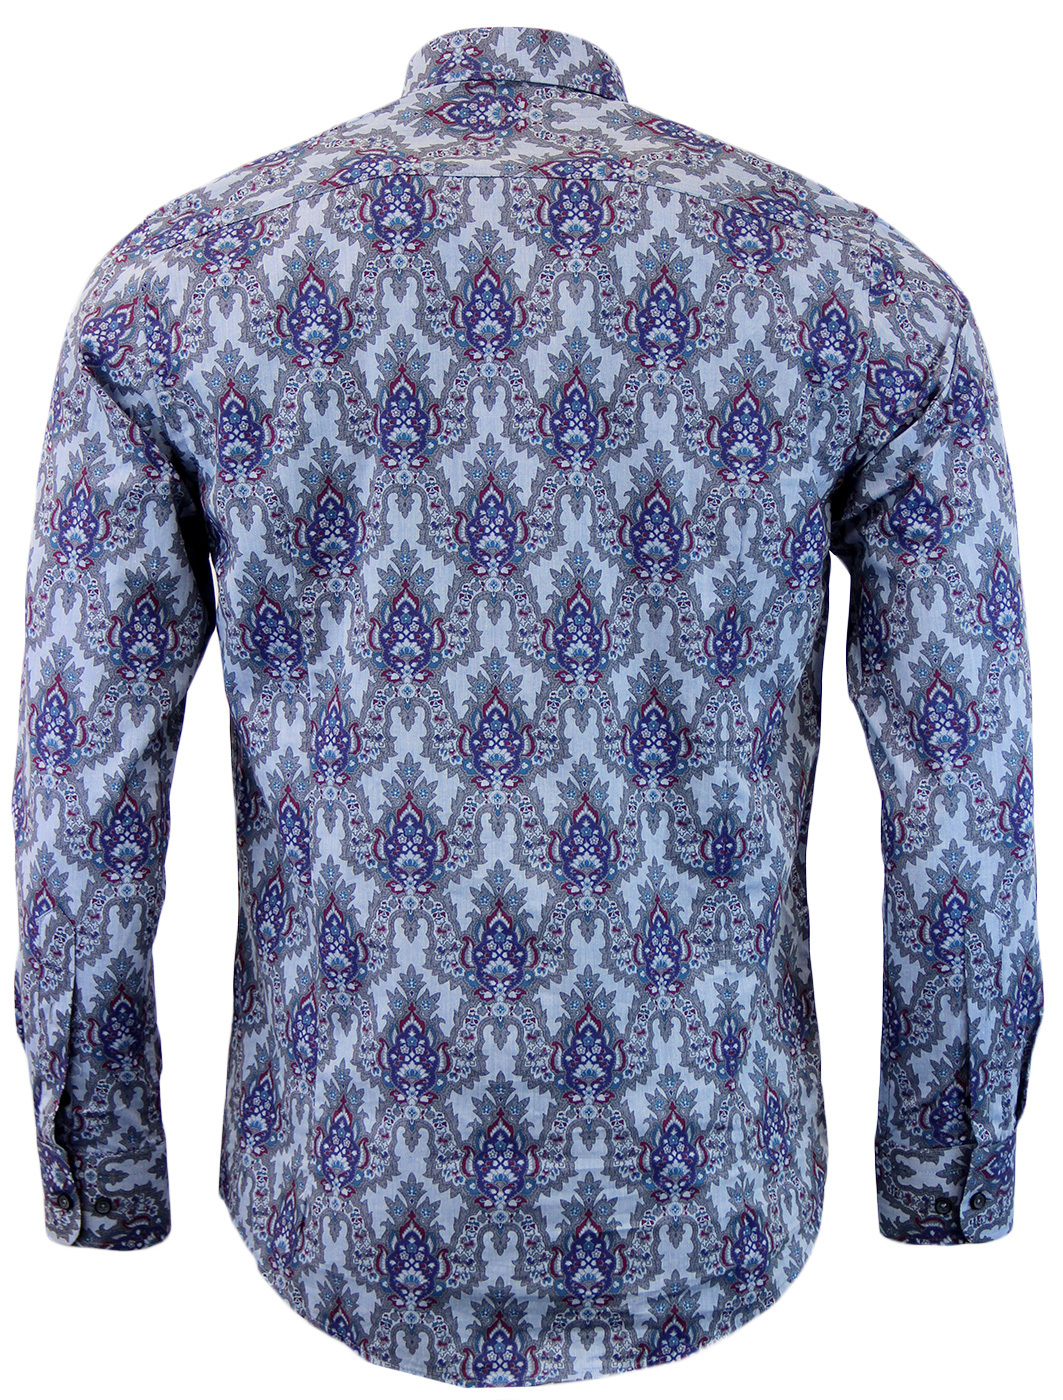 GUIDE LONDON Retro 1960s Mod Floral Paisley Shirt in Blue